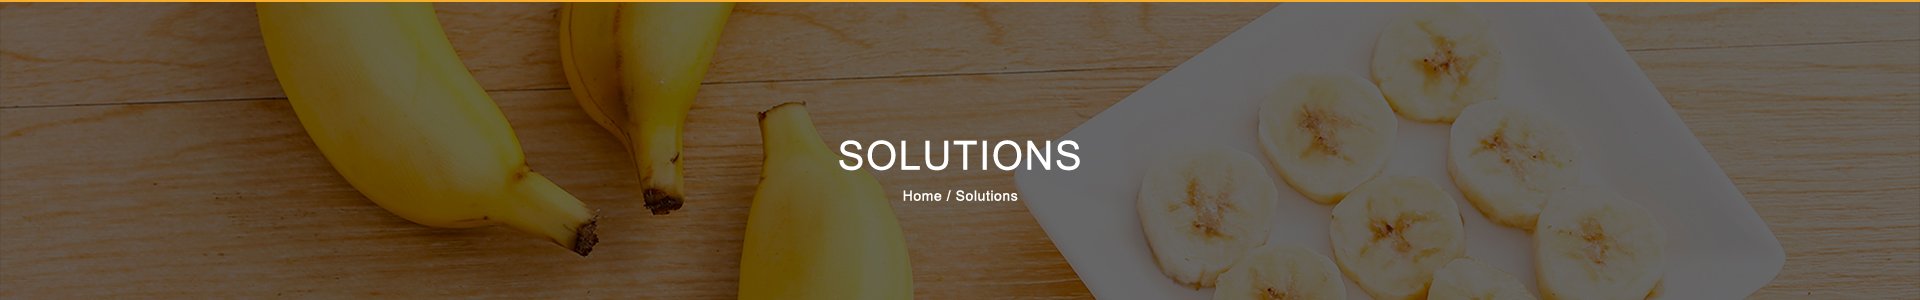 Solutions banner1